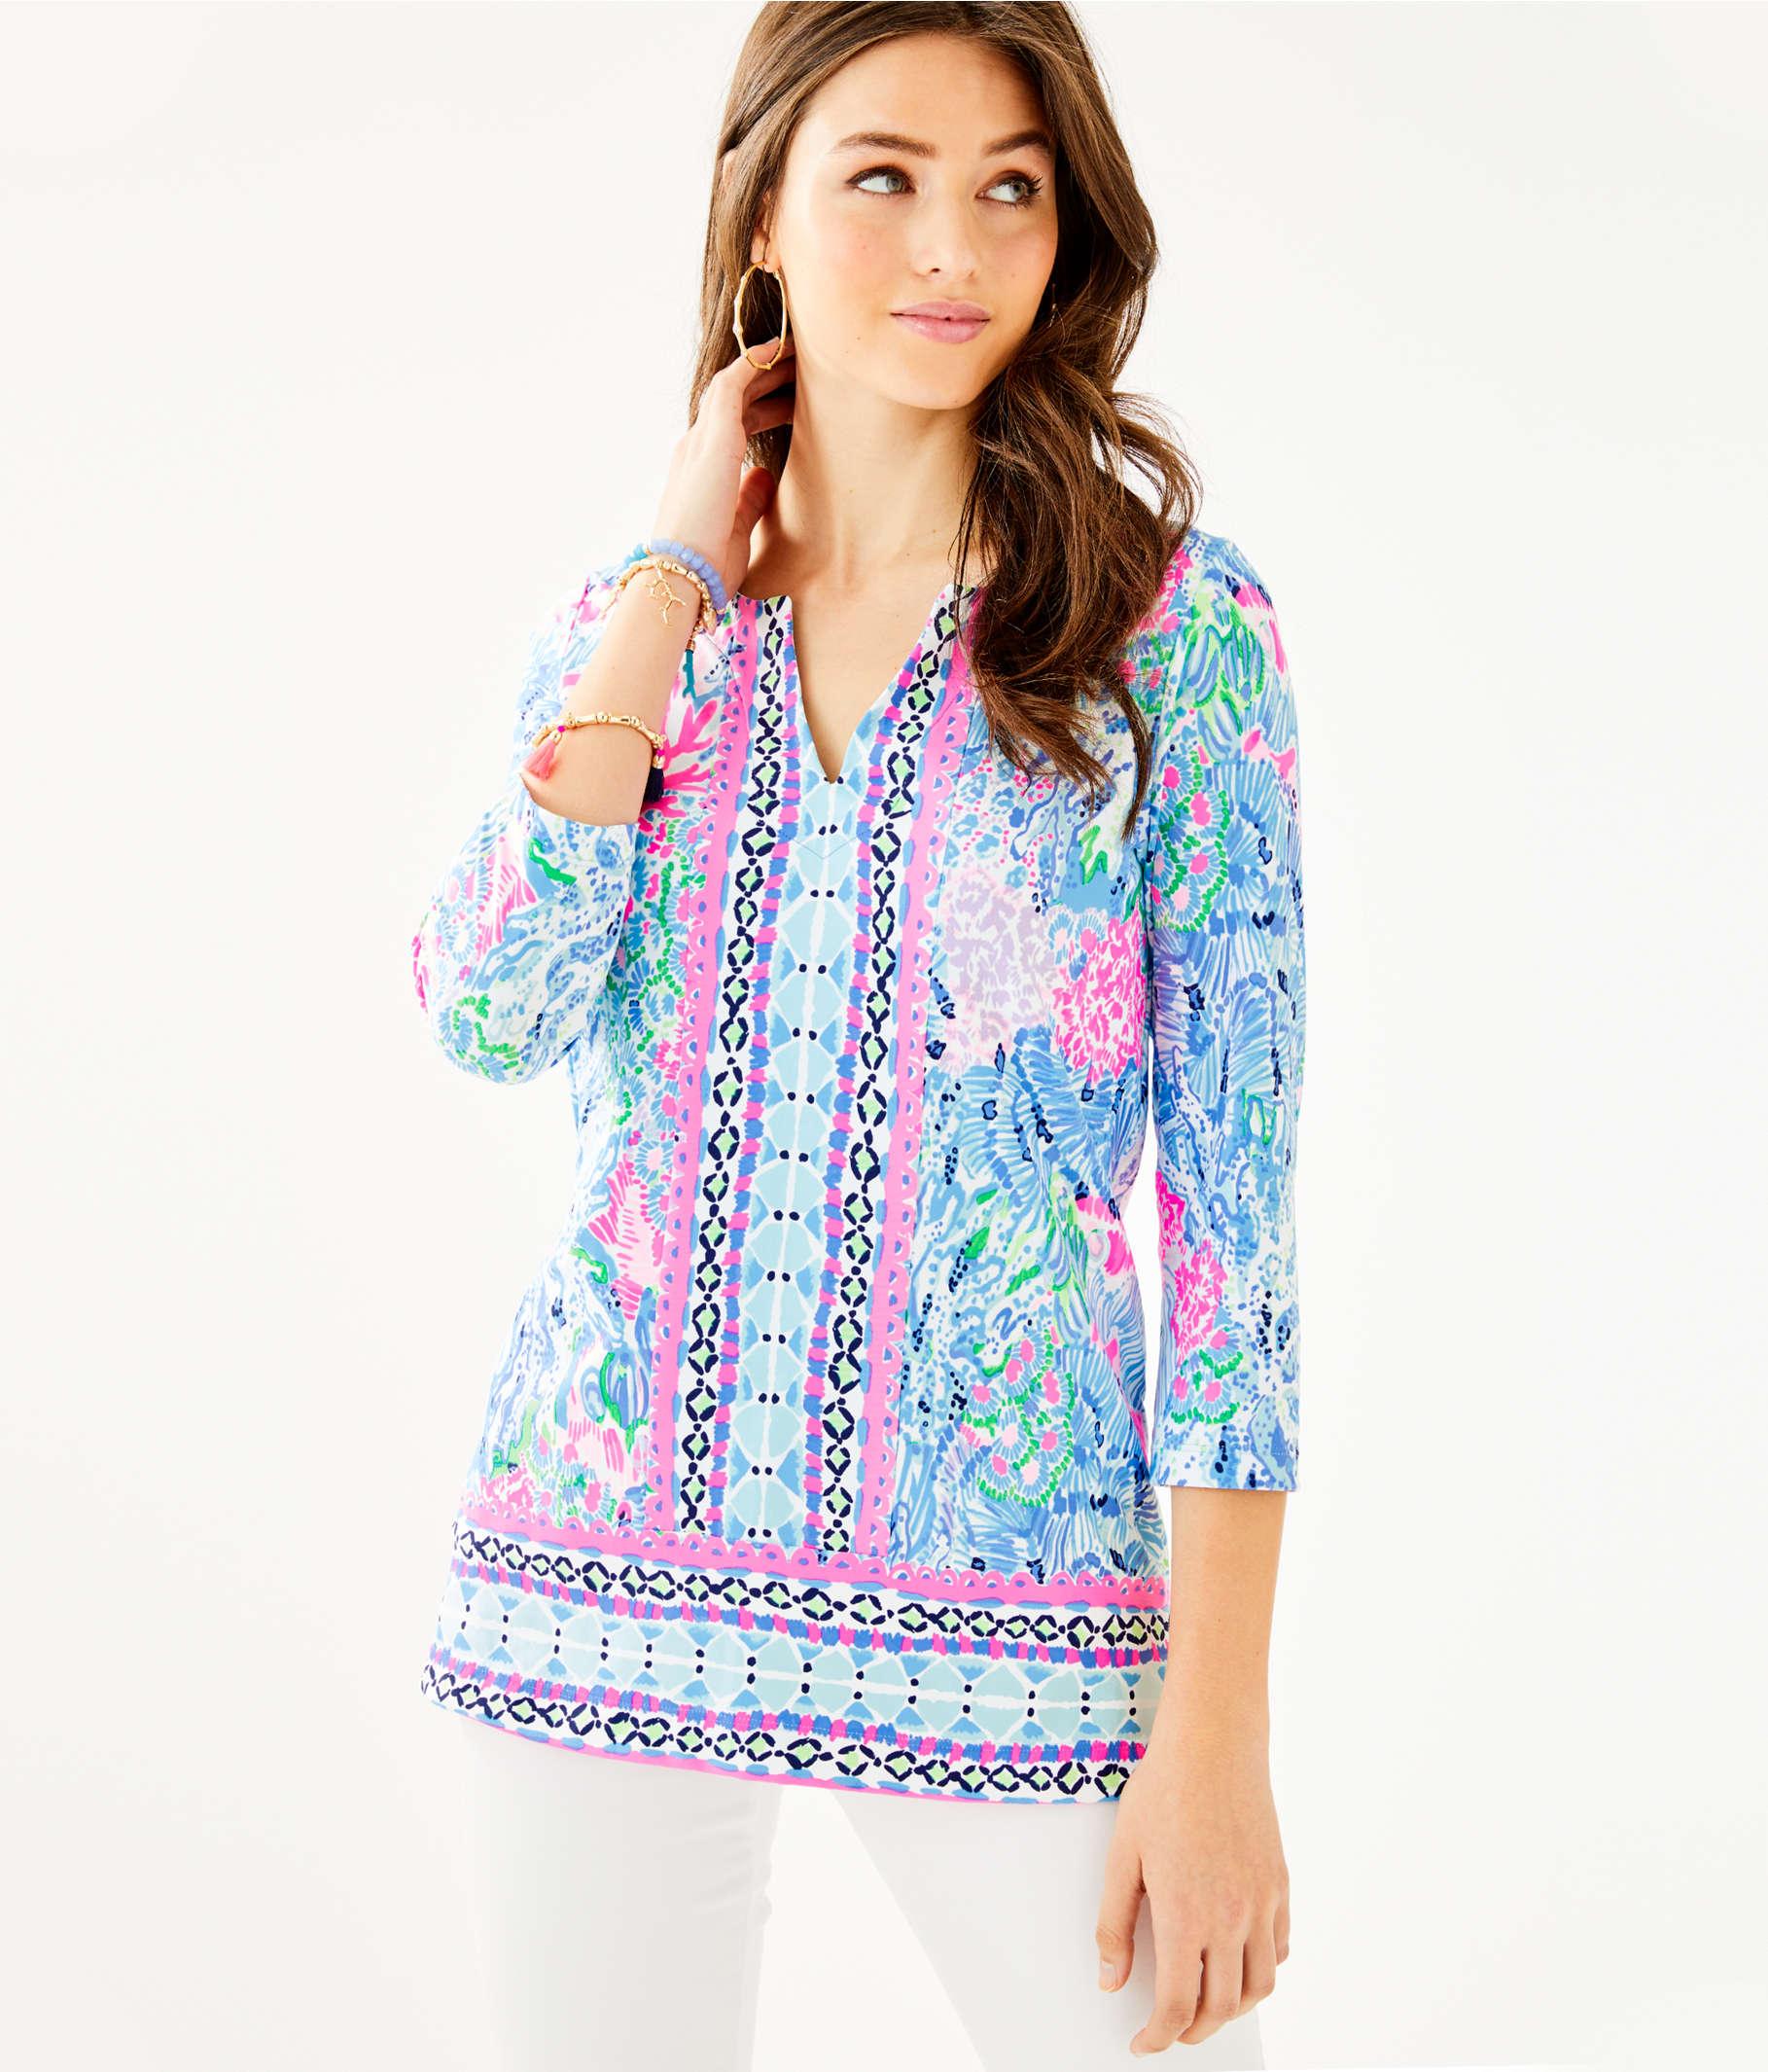 Lilly Pulitzer Upf 50+ Chillylilly Karina Tunic in Blue - Lyst